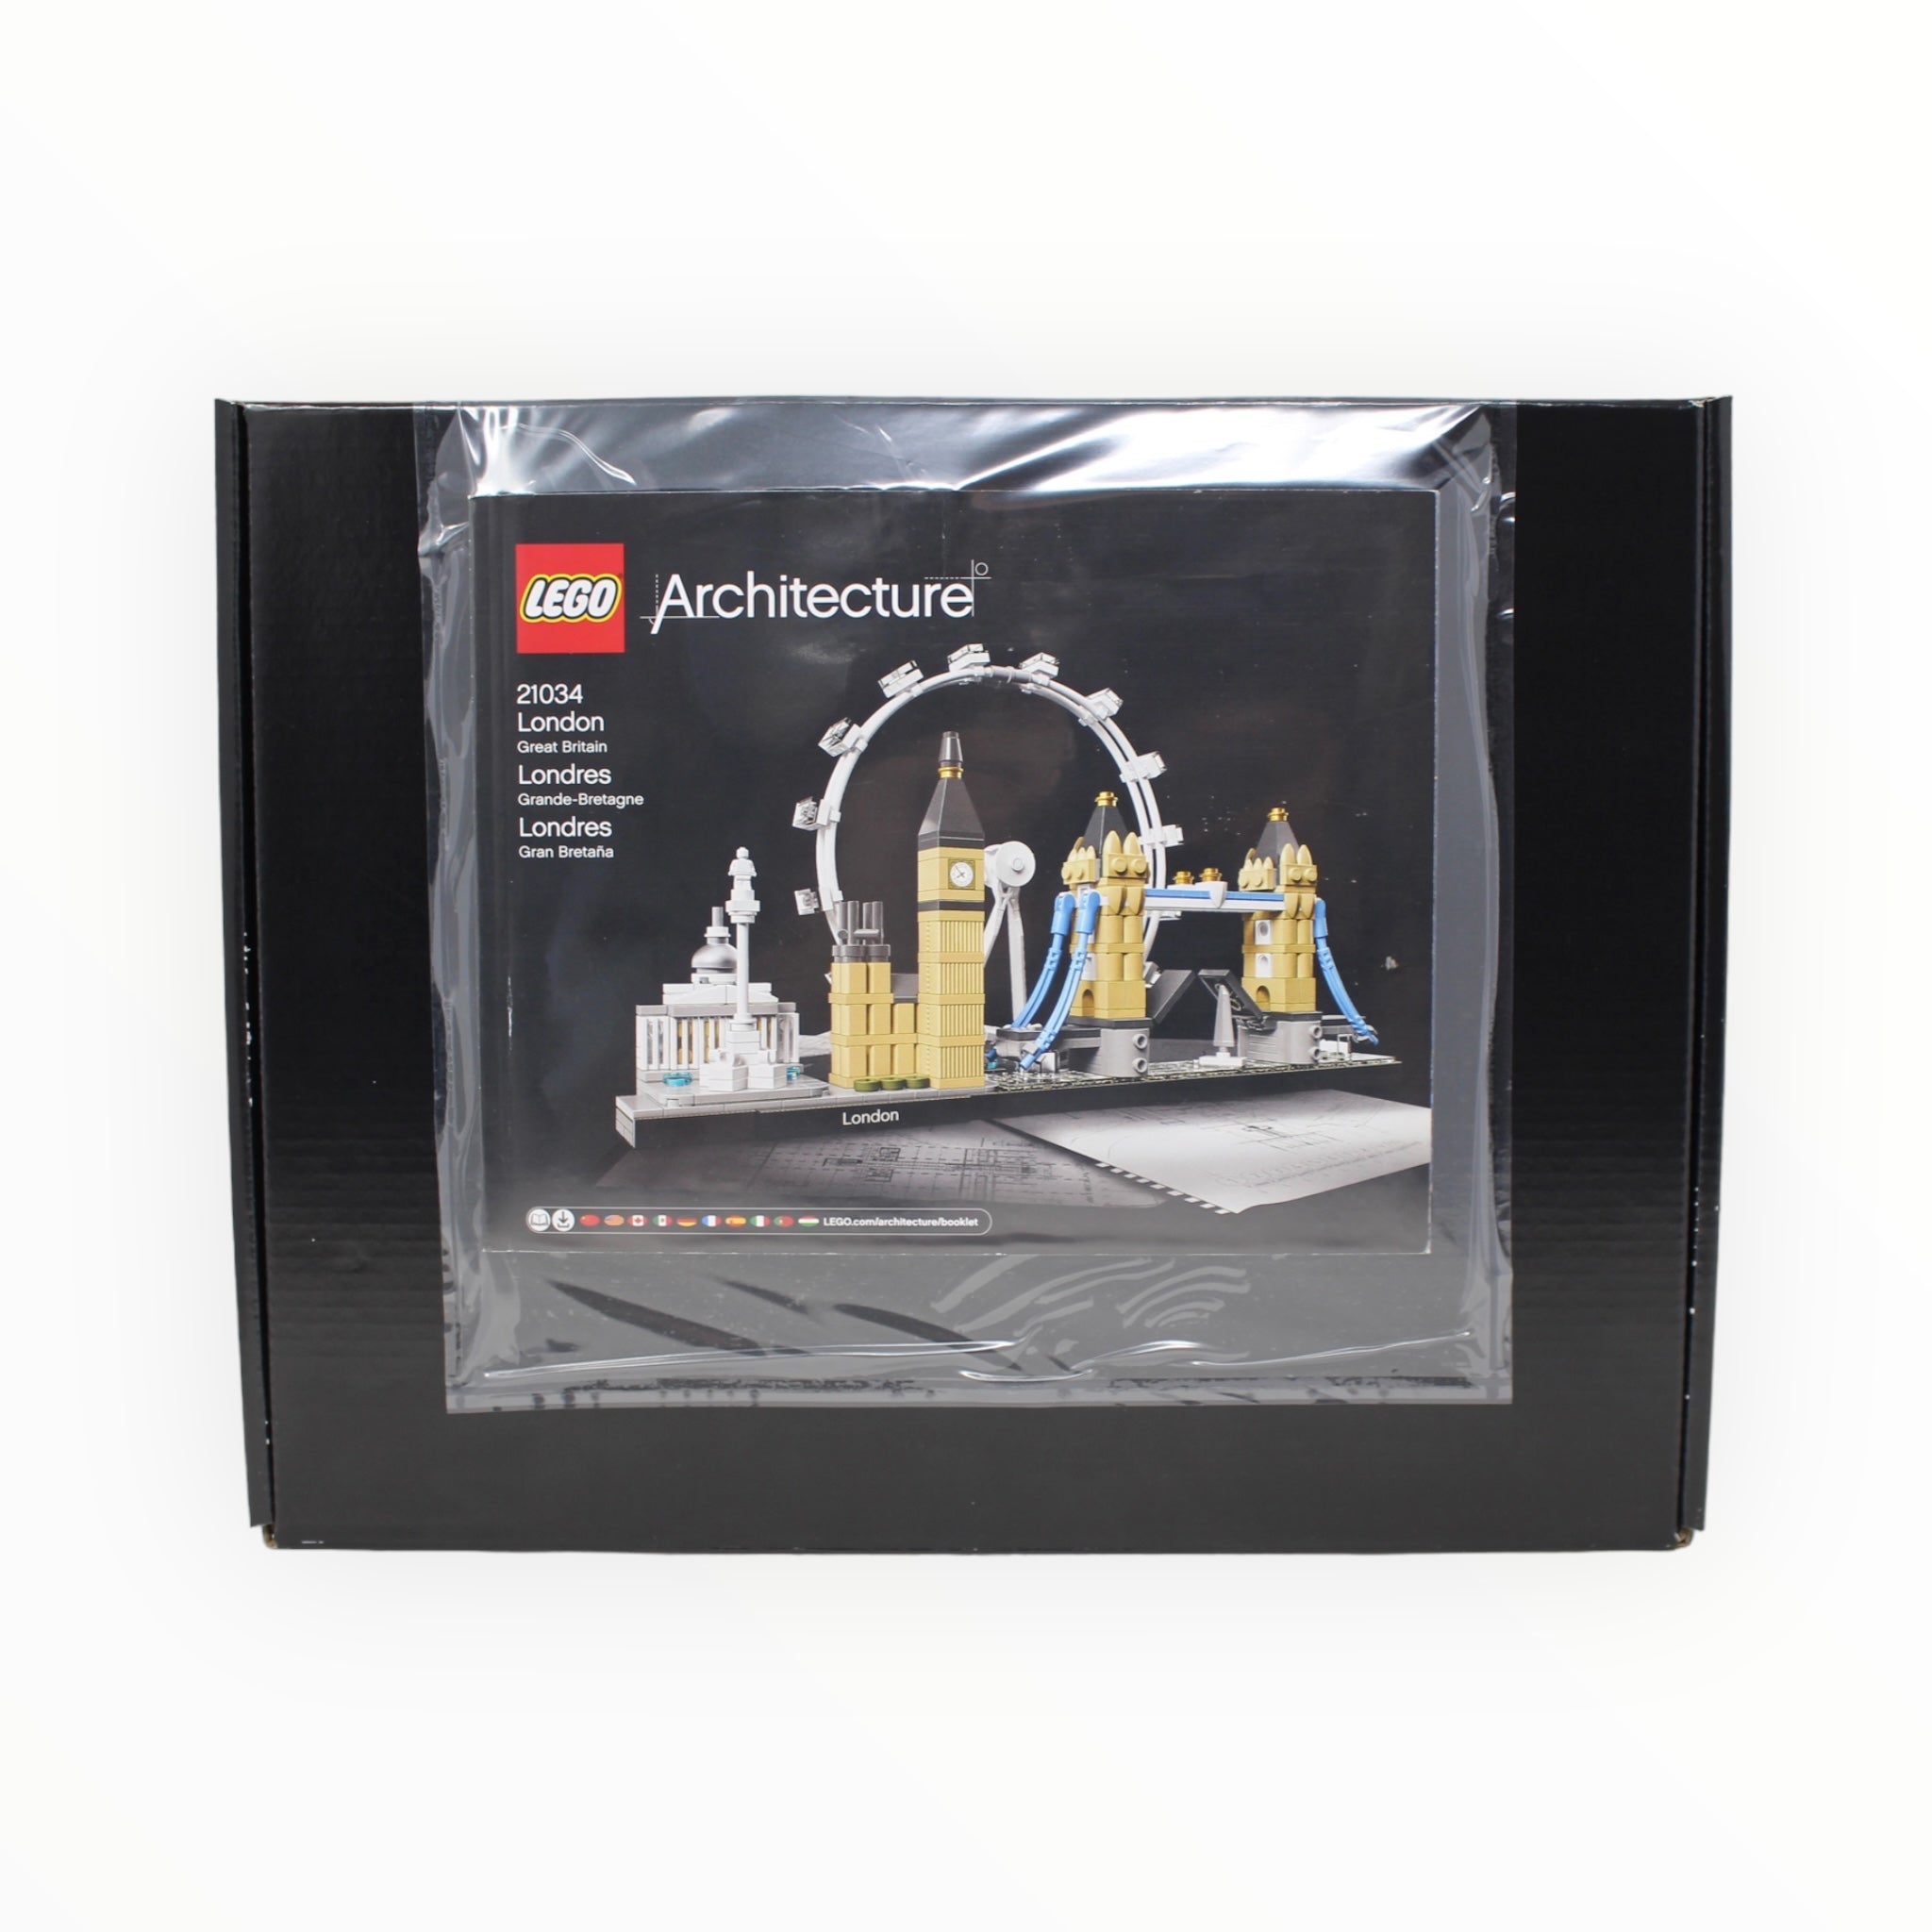 Certified Used Set 21034 Architecture London (no box)